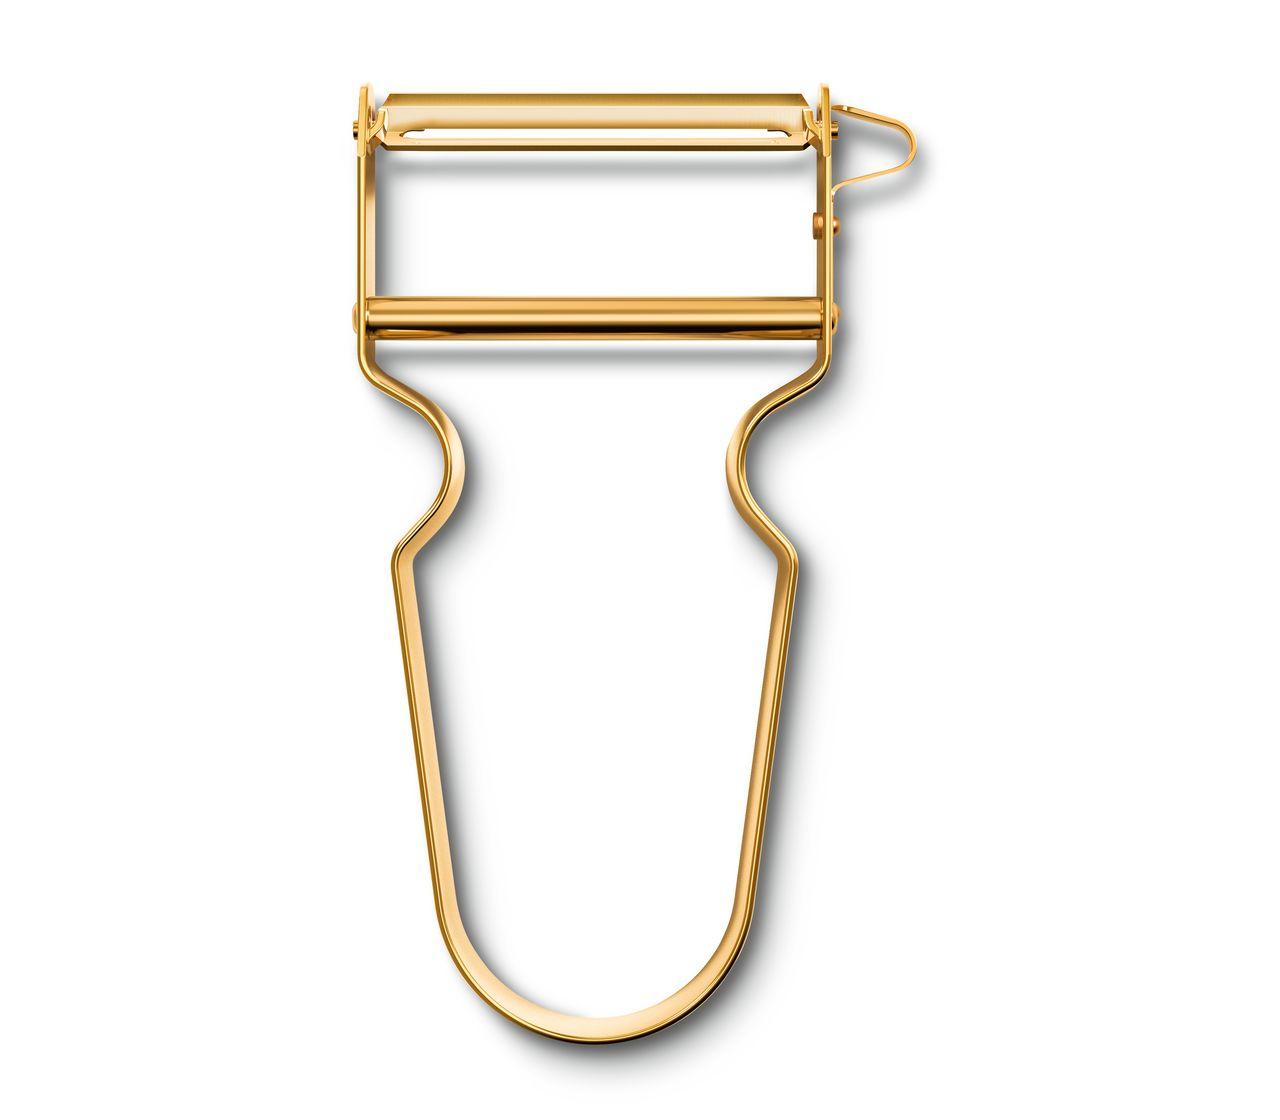 Victorinox REX Peeler Gold Plated in gold - 6.0900.88